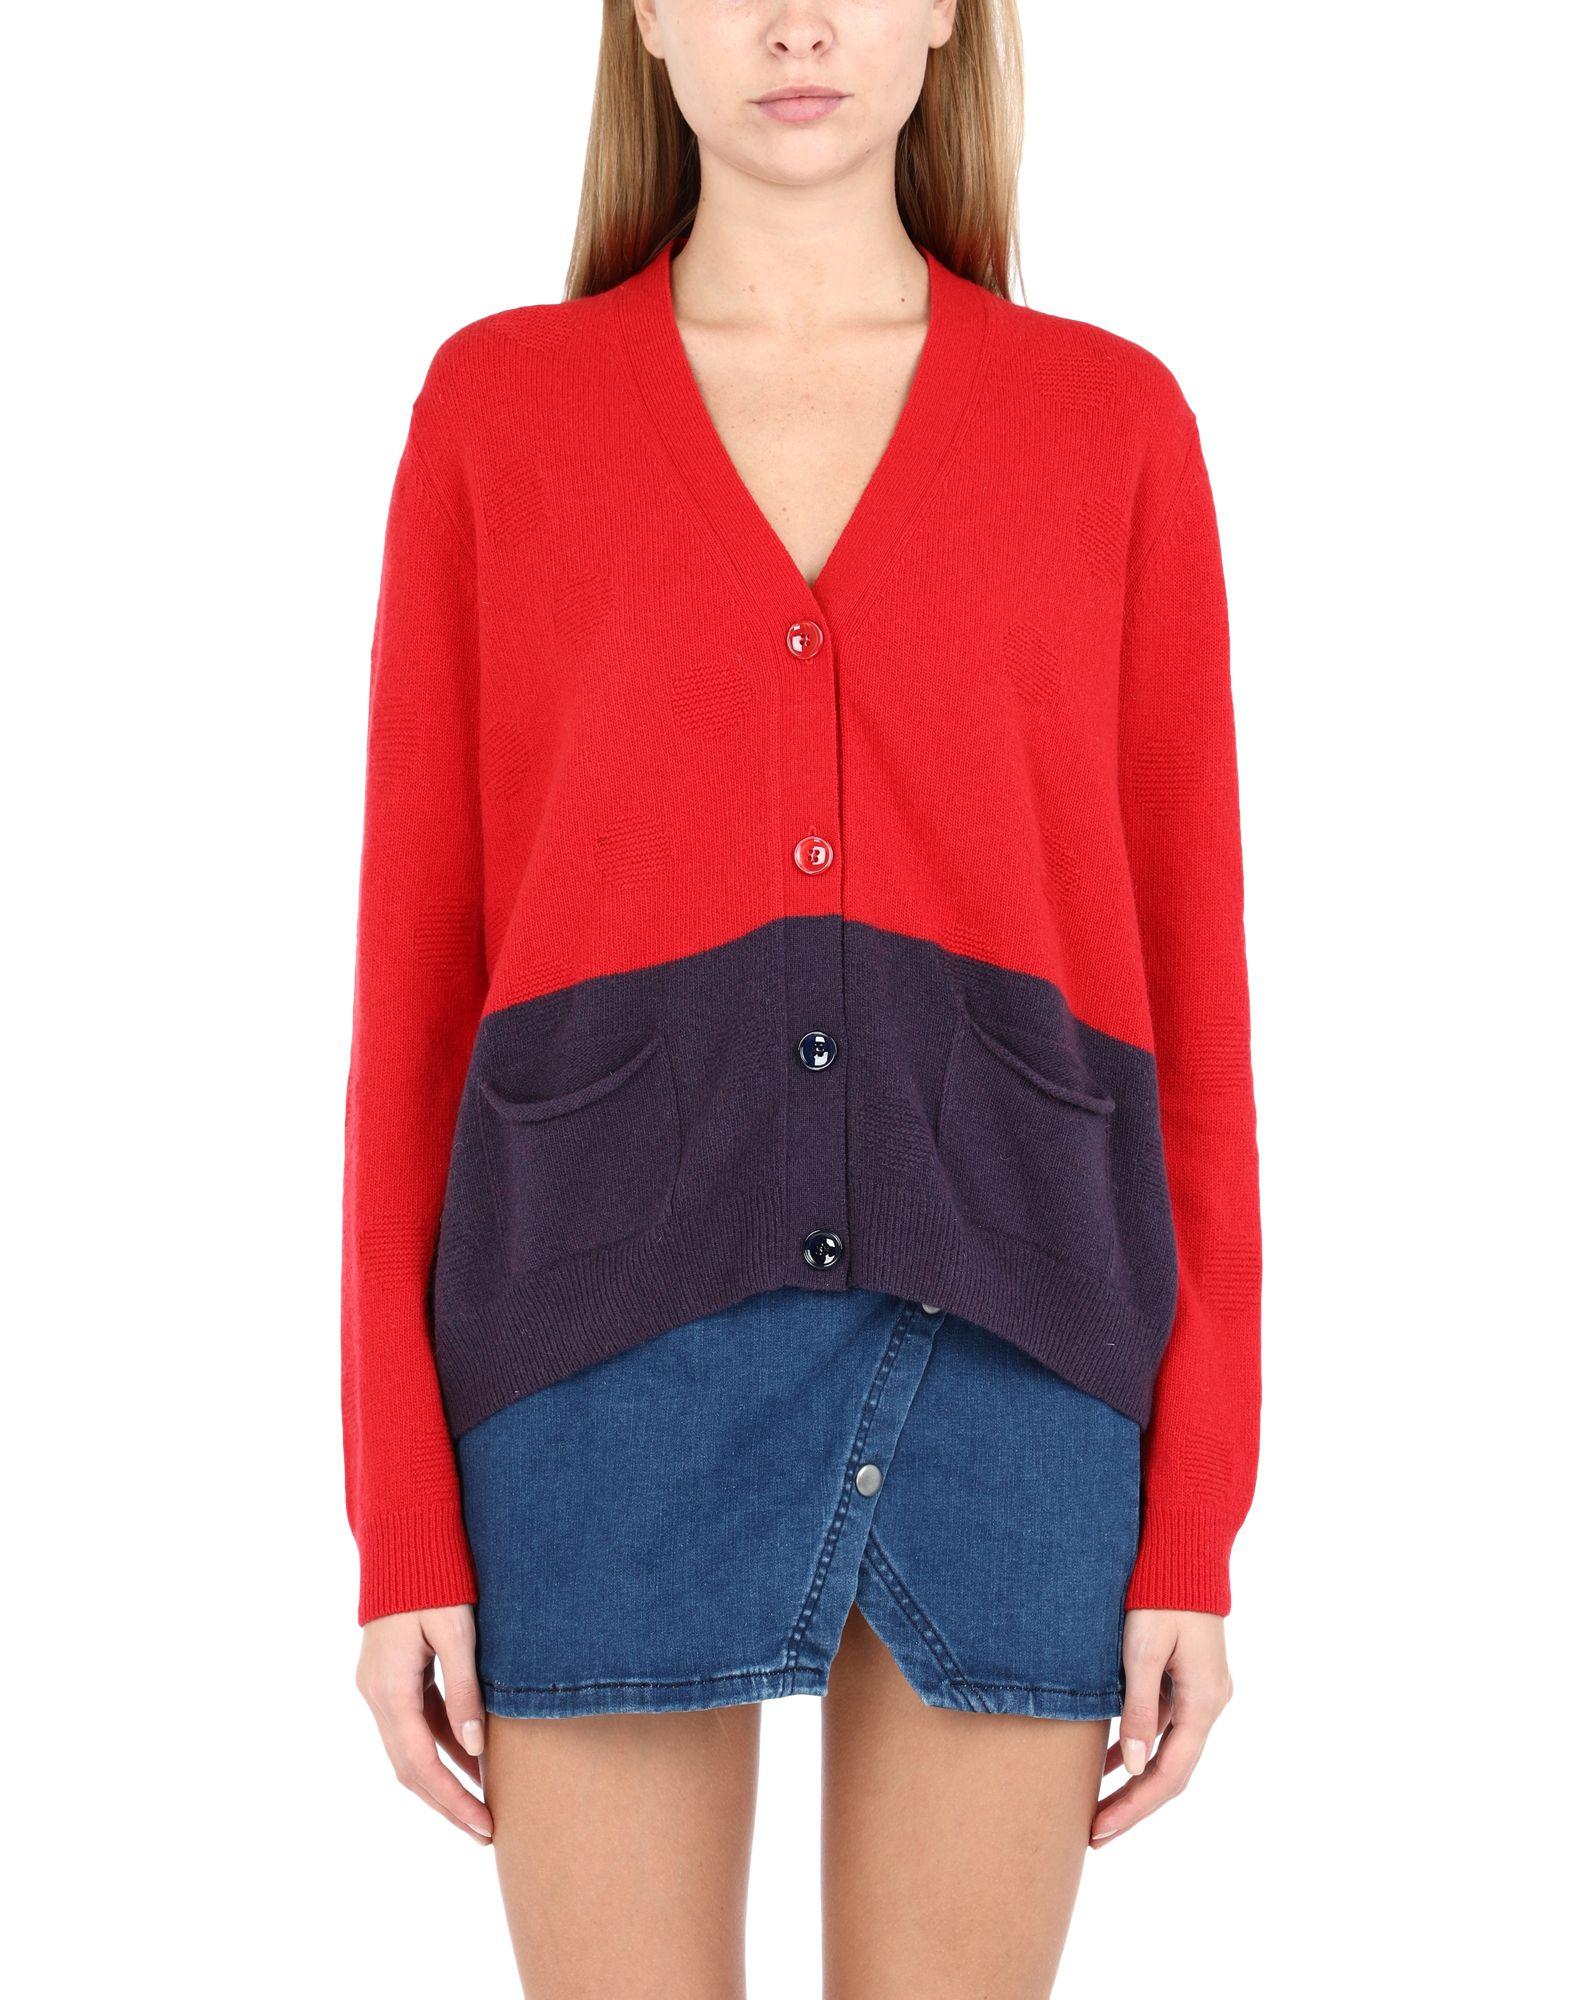 PS by Paul Smith Synthetic Cardigan in Red - Lyst